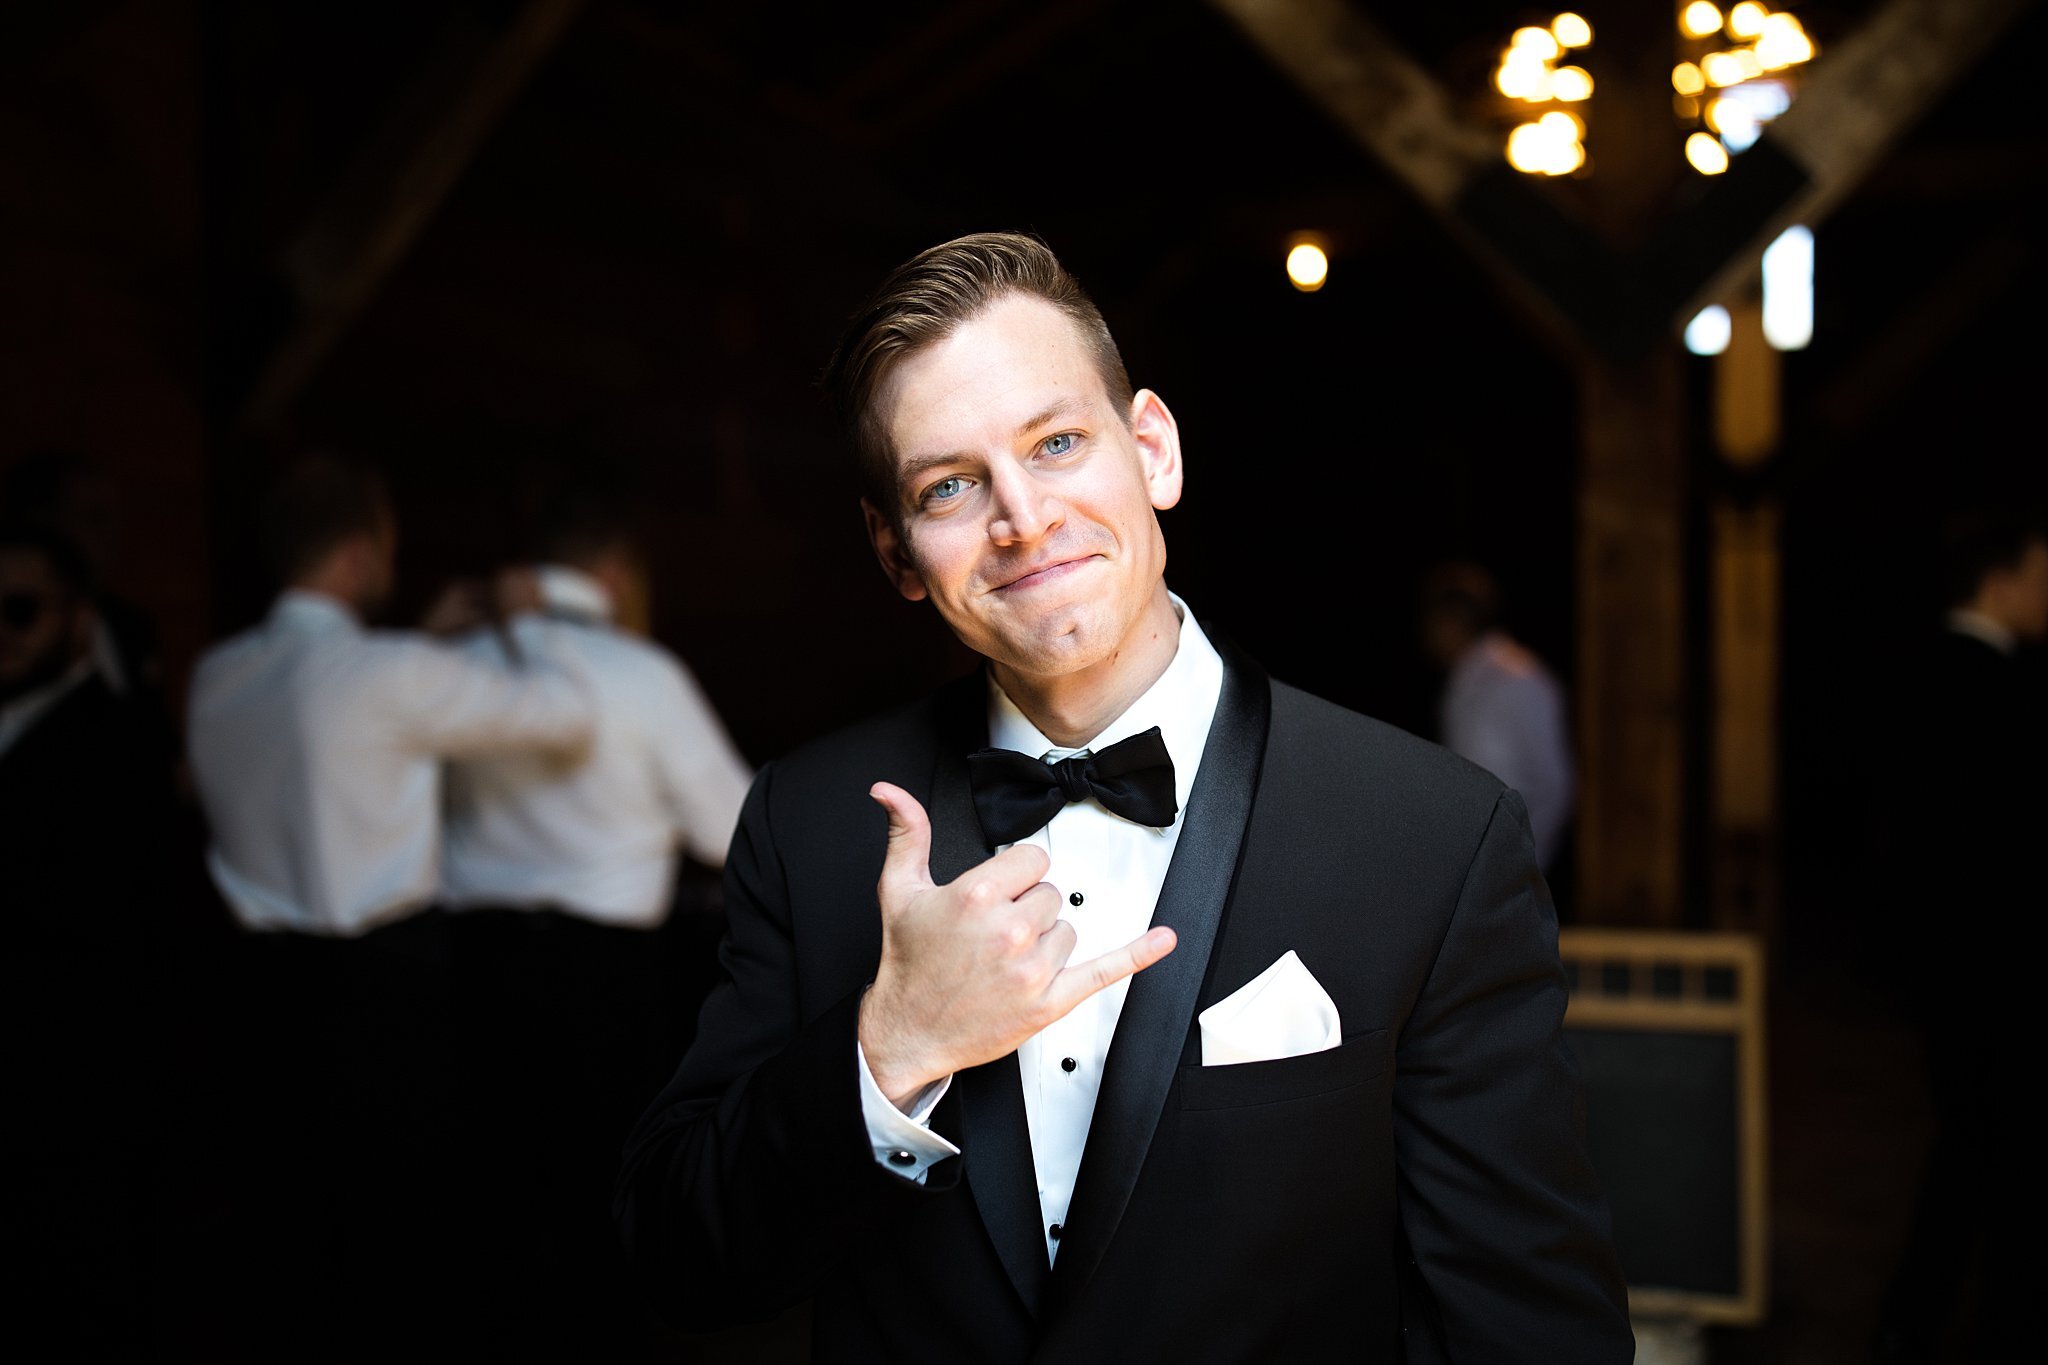  Groom smiling and signing hang loose. 